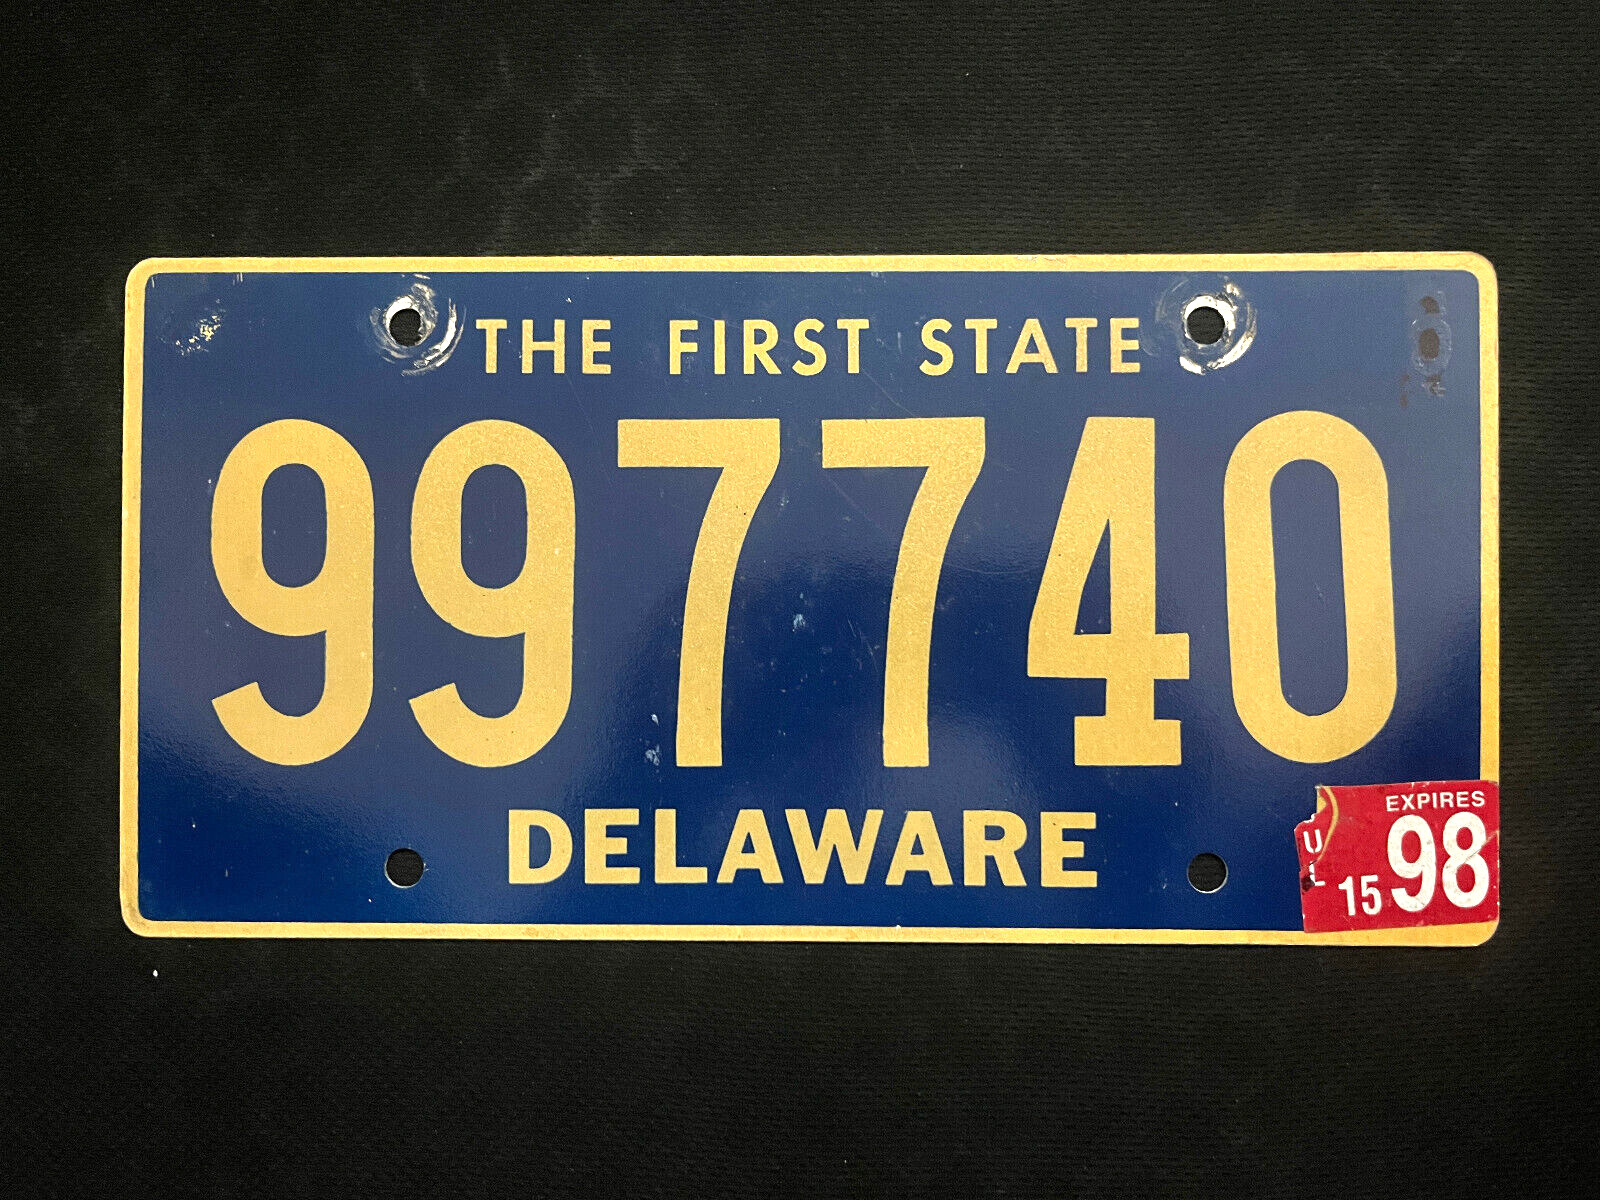 1998 Delaware License Plate 997740 ... THE FIRST STATE, BEAUTIFUL YELLOW ON BLUE